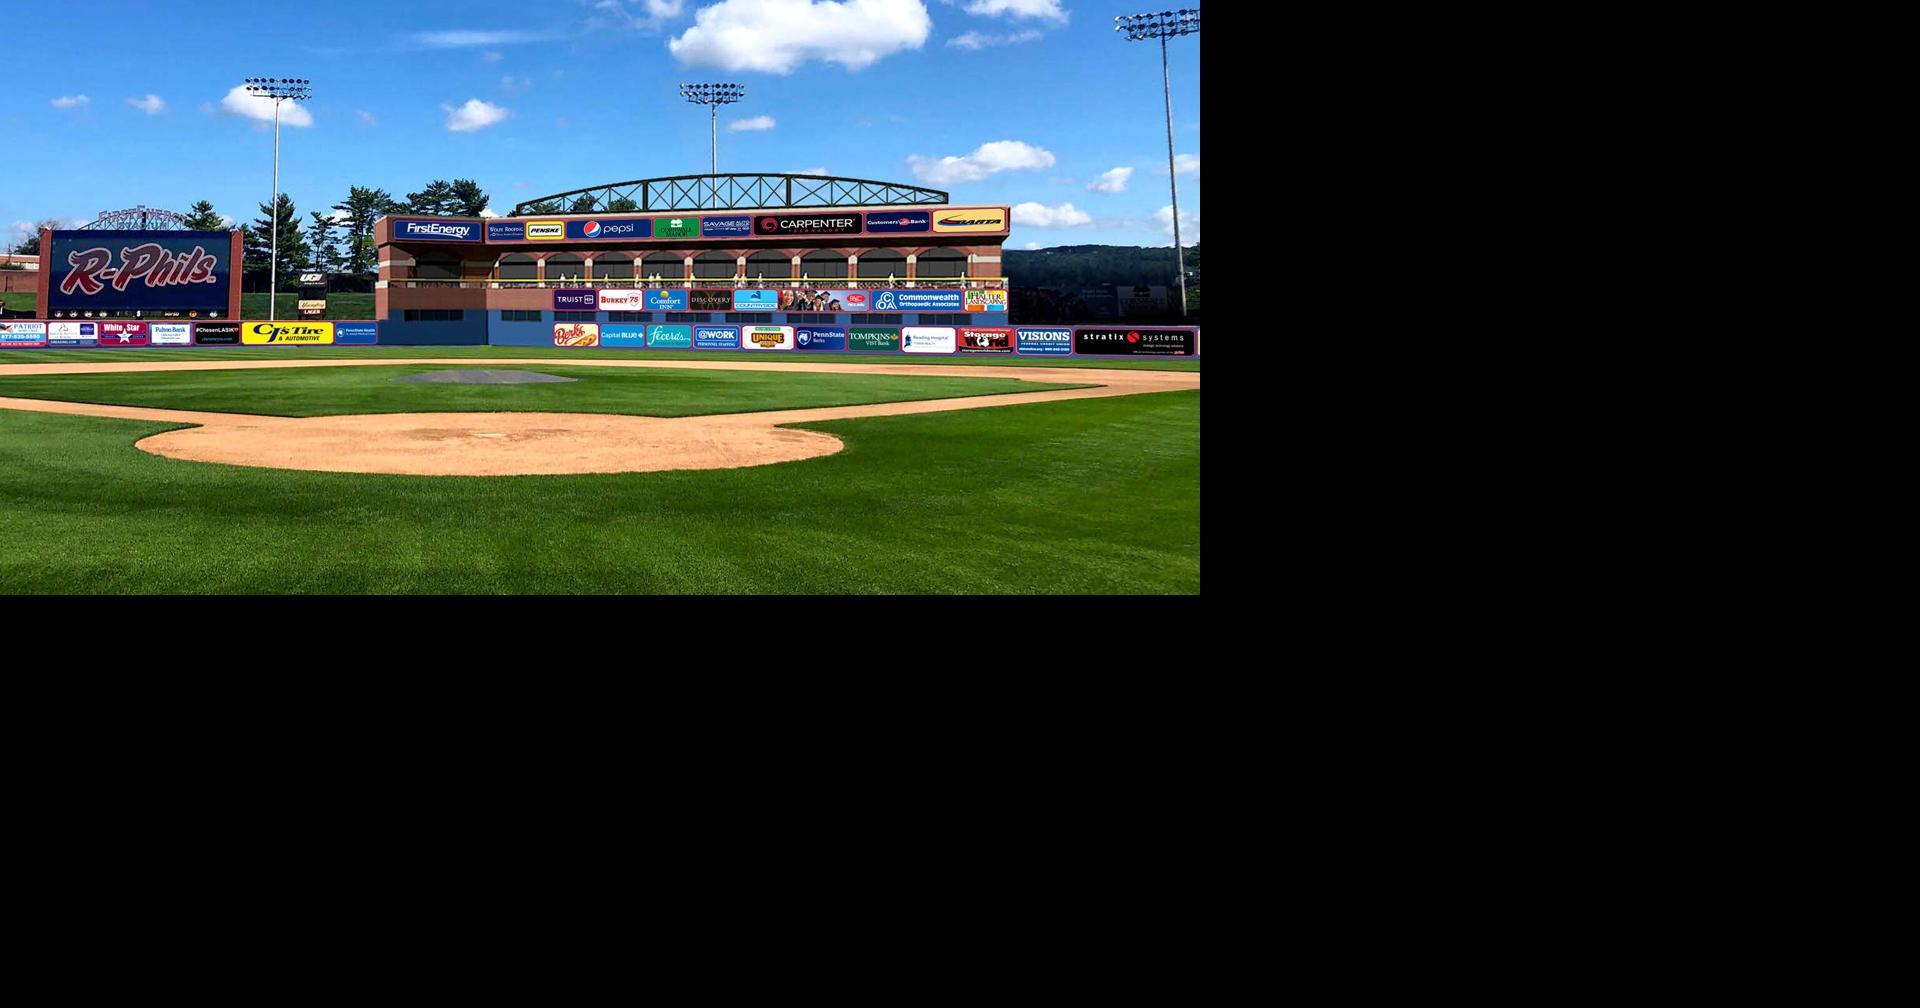 Reading Fightin Phils Official Store